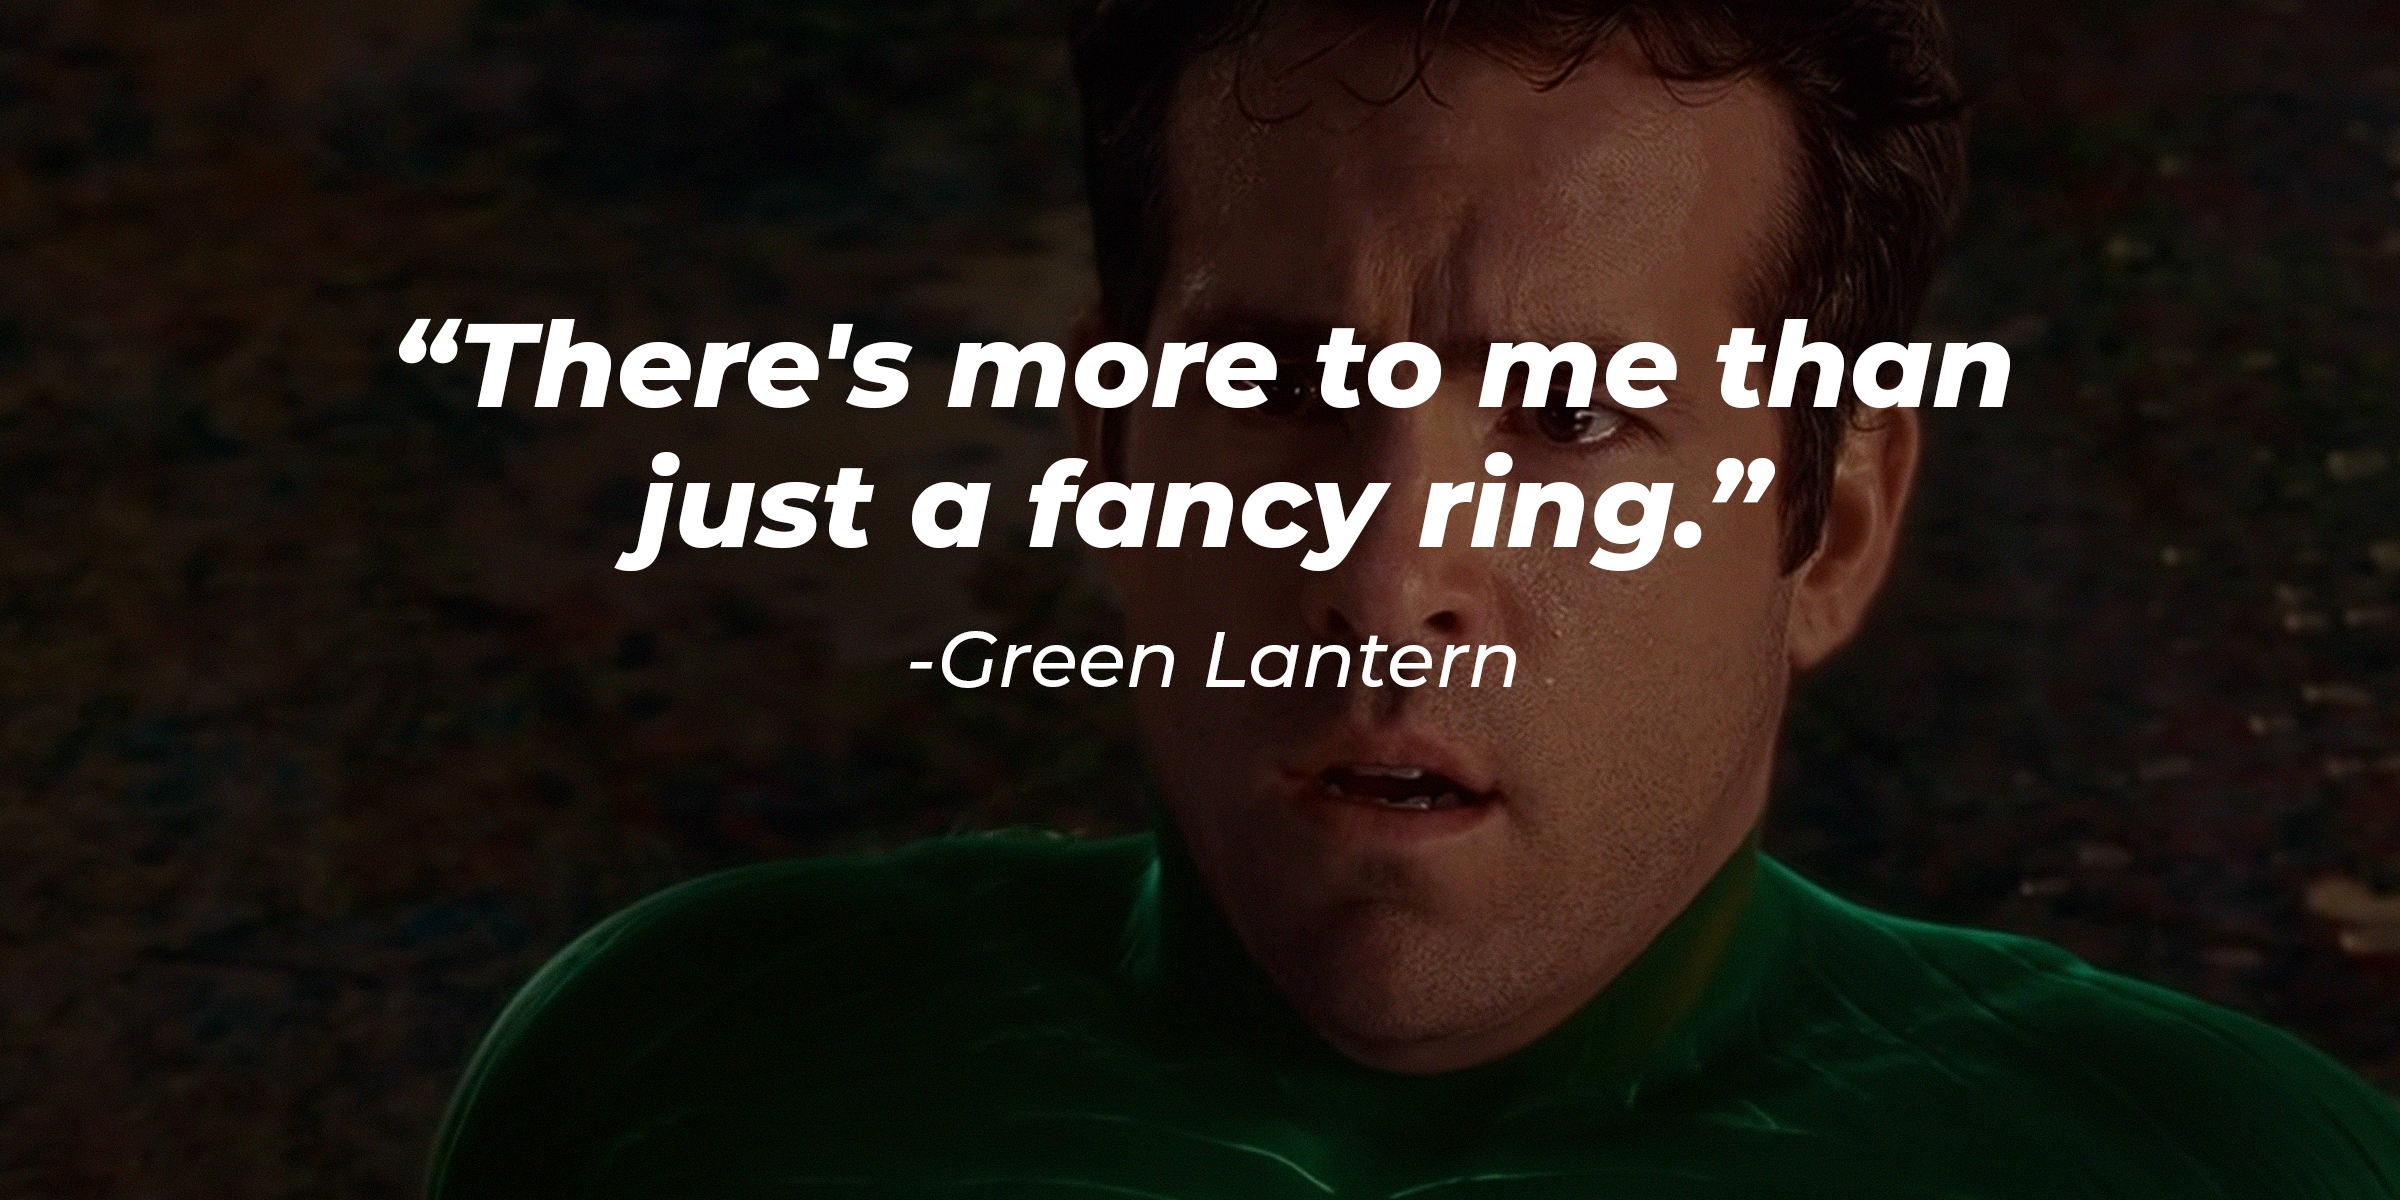 A photo of Green Lantern with the quote: "There's more to me than just a fancy ring." | Source: youtube.com/WarnerBrosPictures